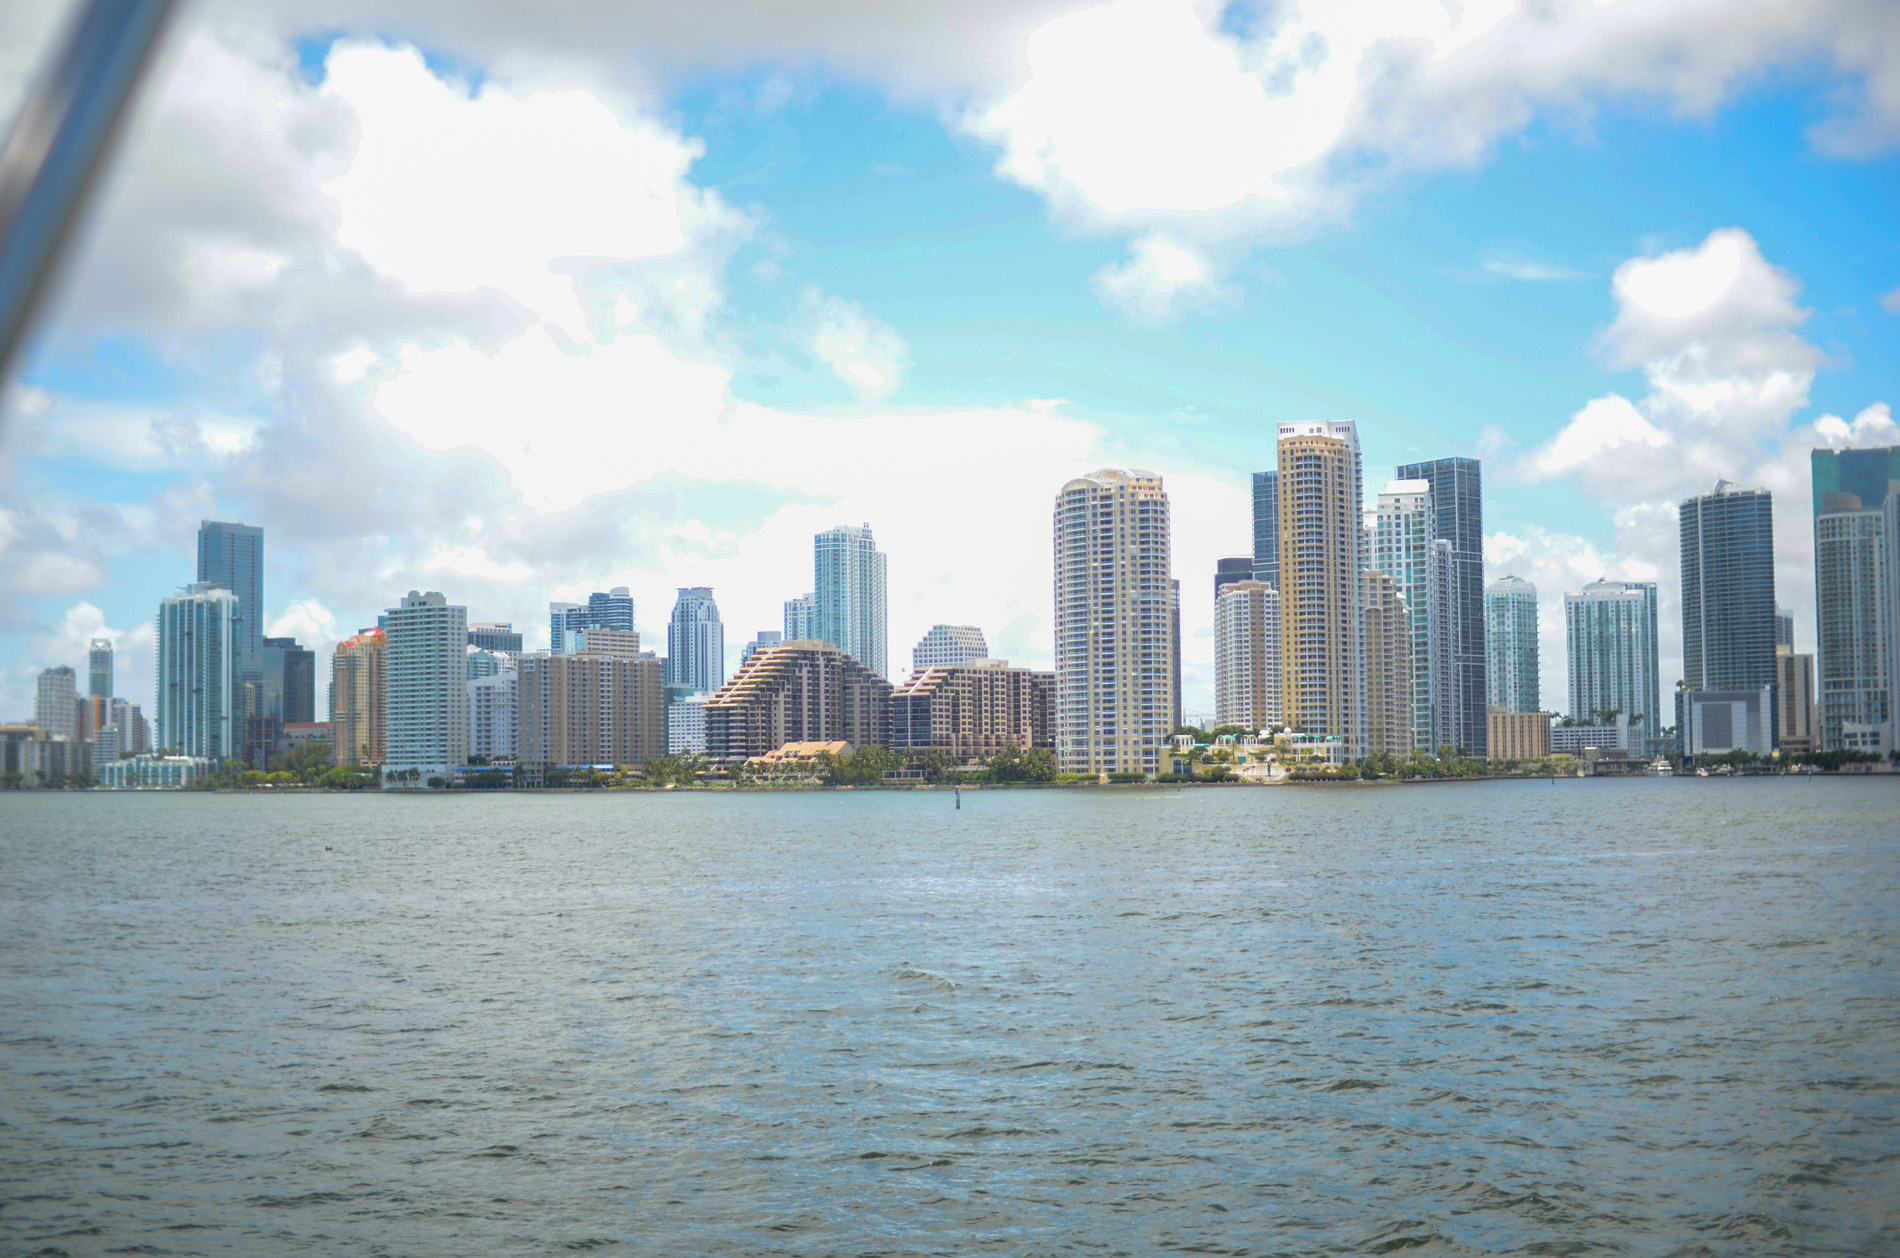 Miami skyline from the sea